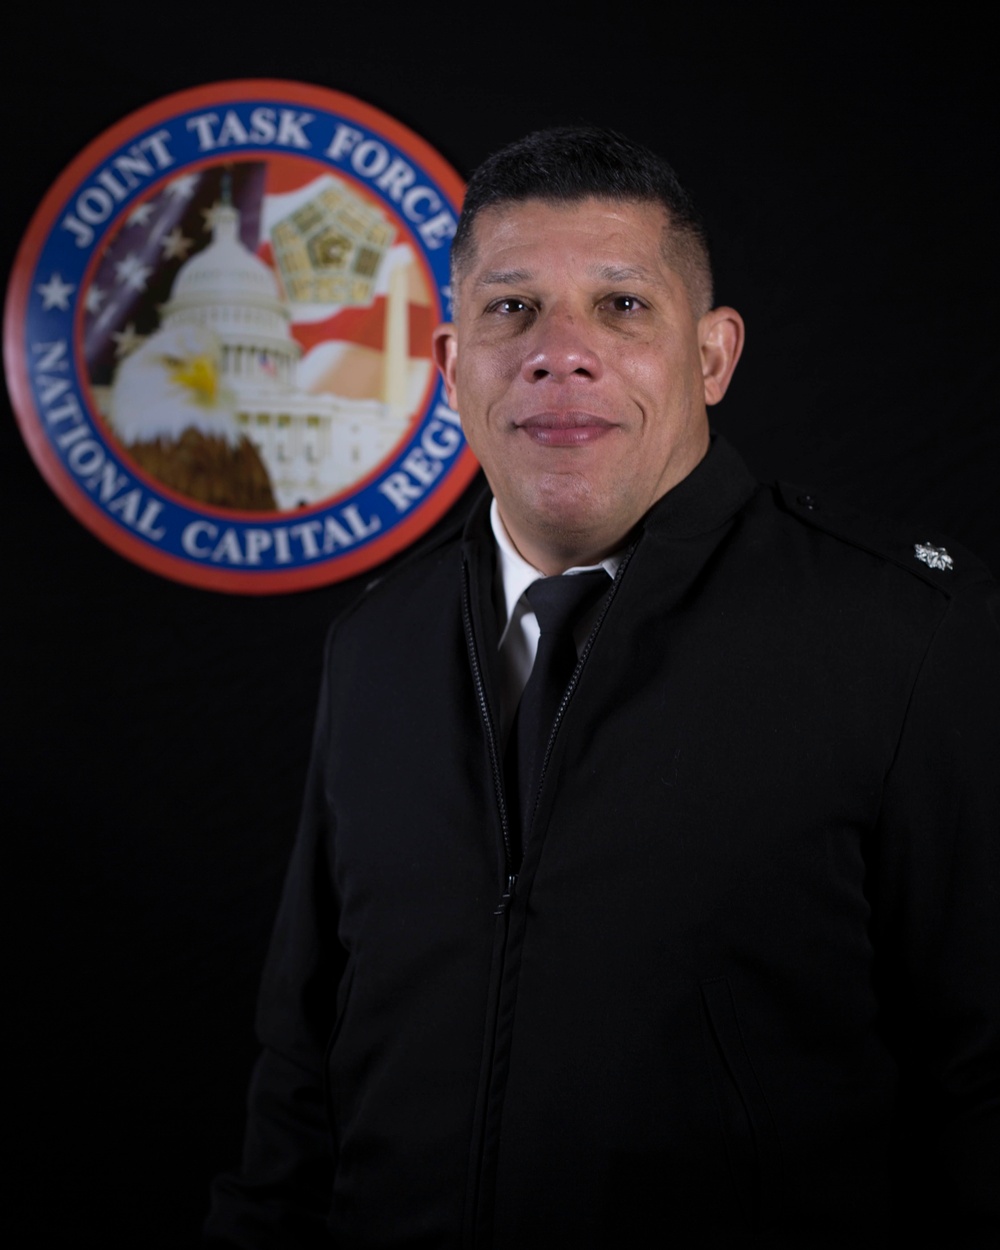 Army Lt. Col. Guzman supports the 58th Presidential Inauguration